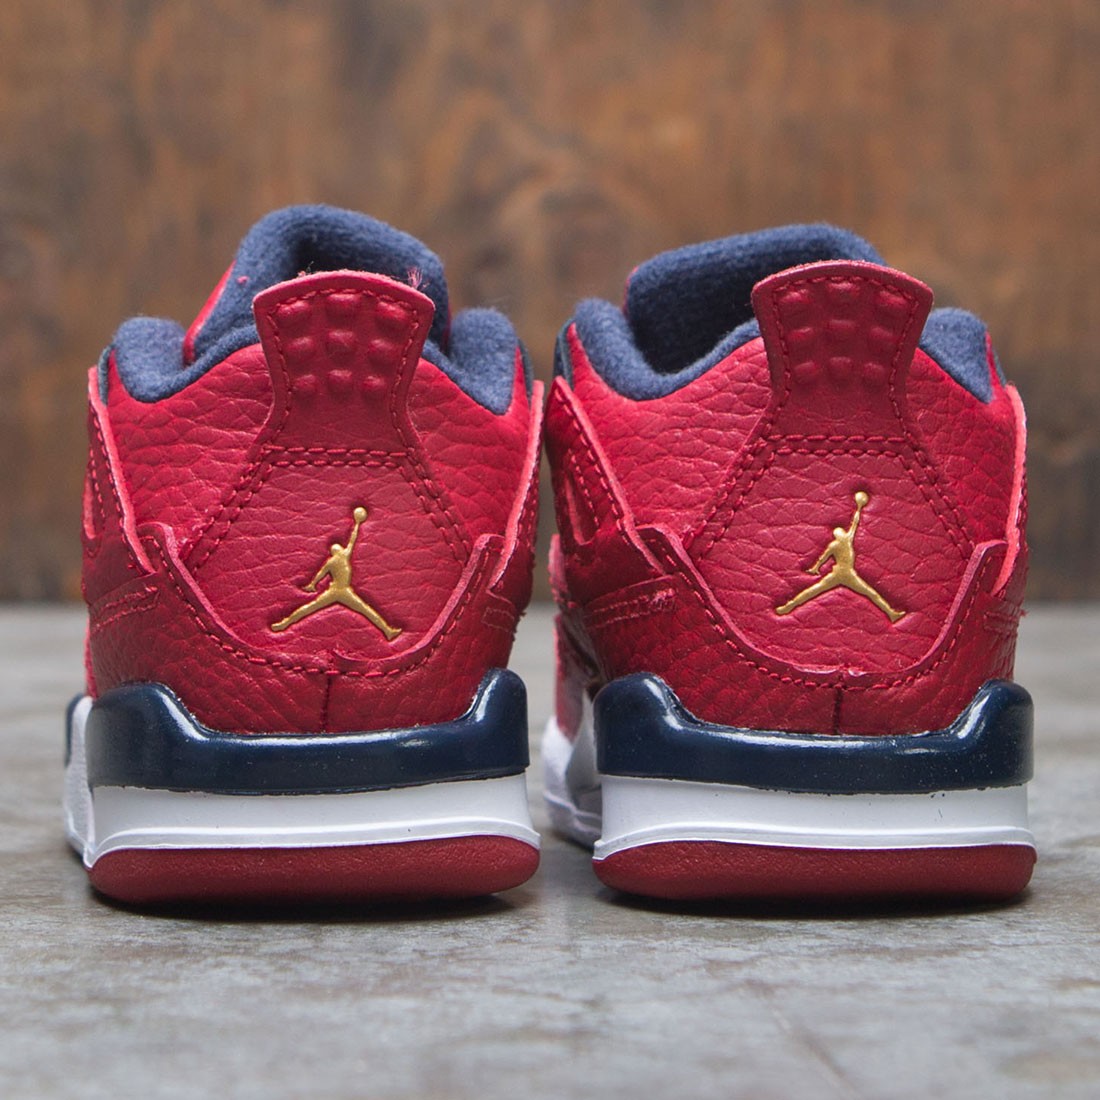 jordan 4 white red and blue